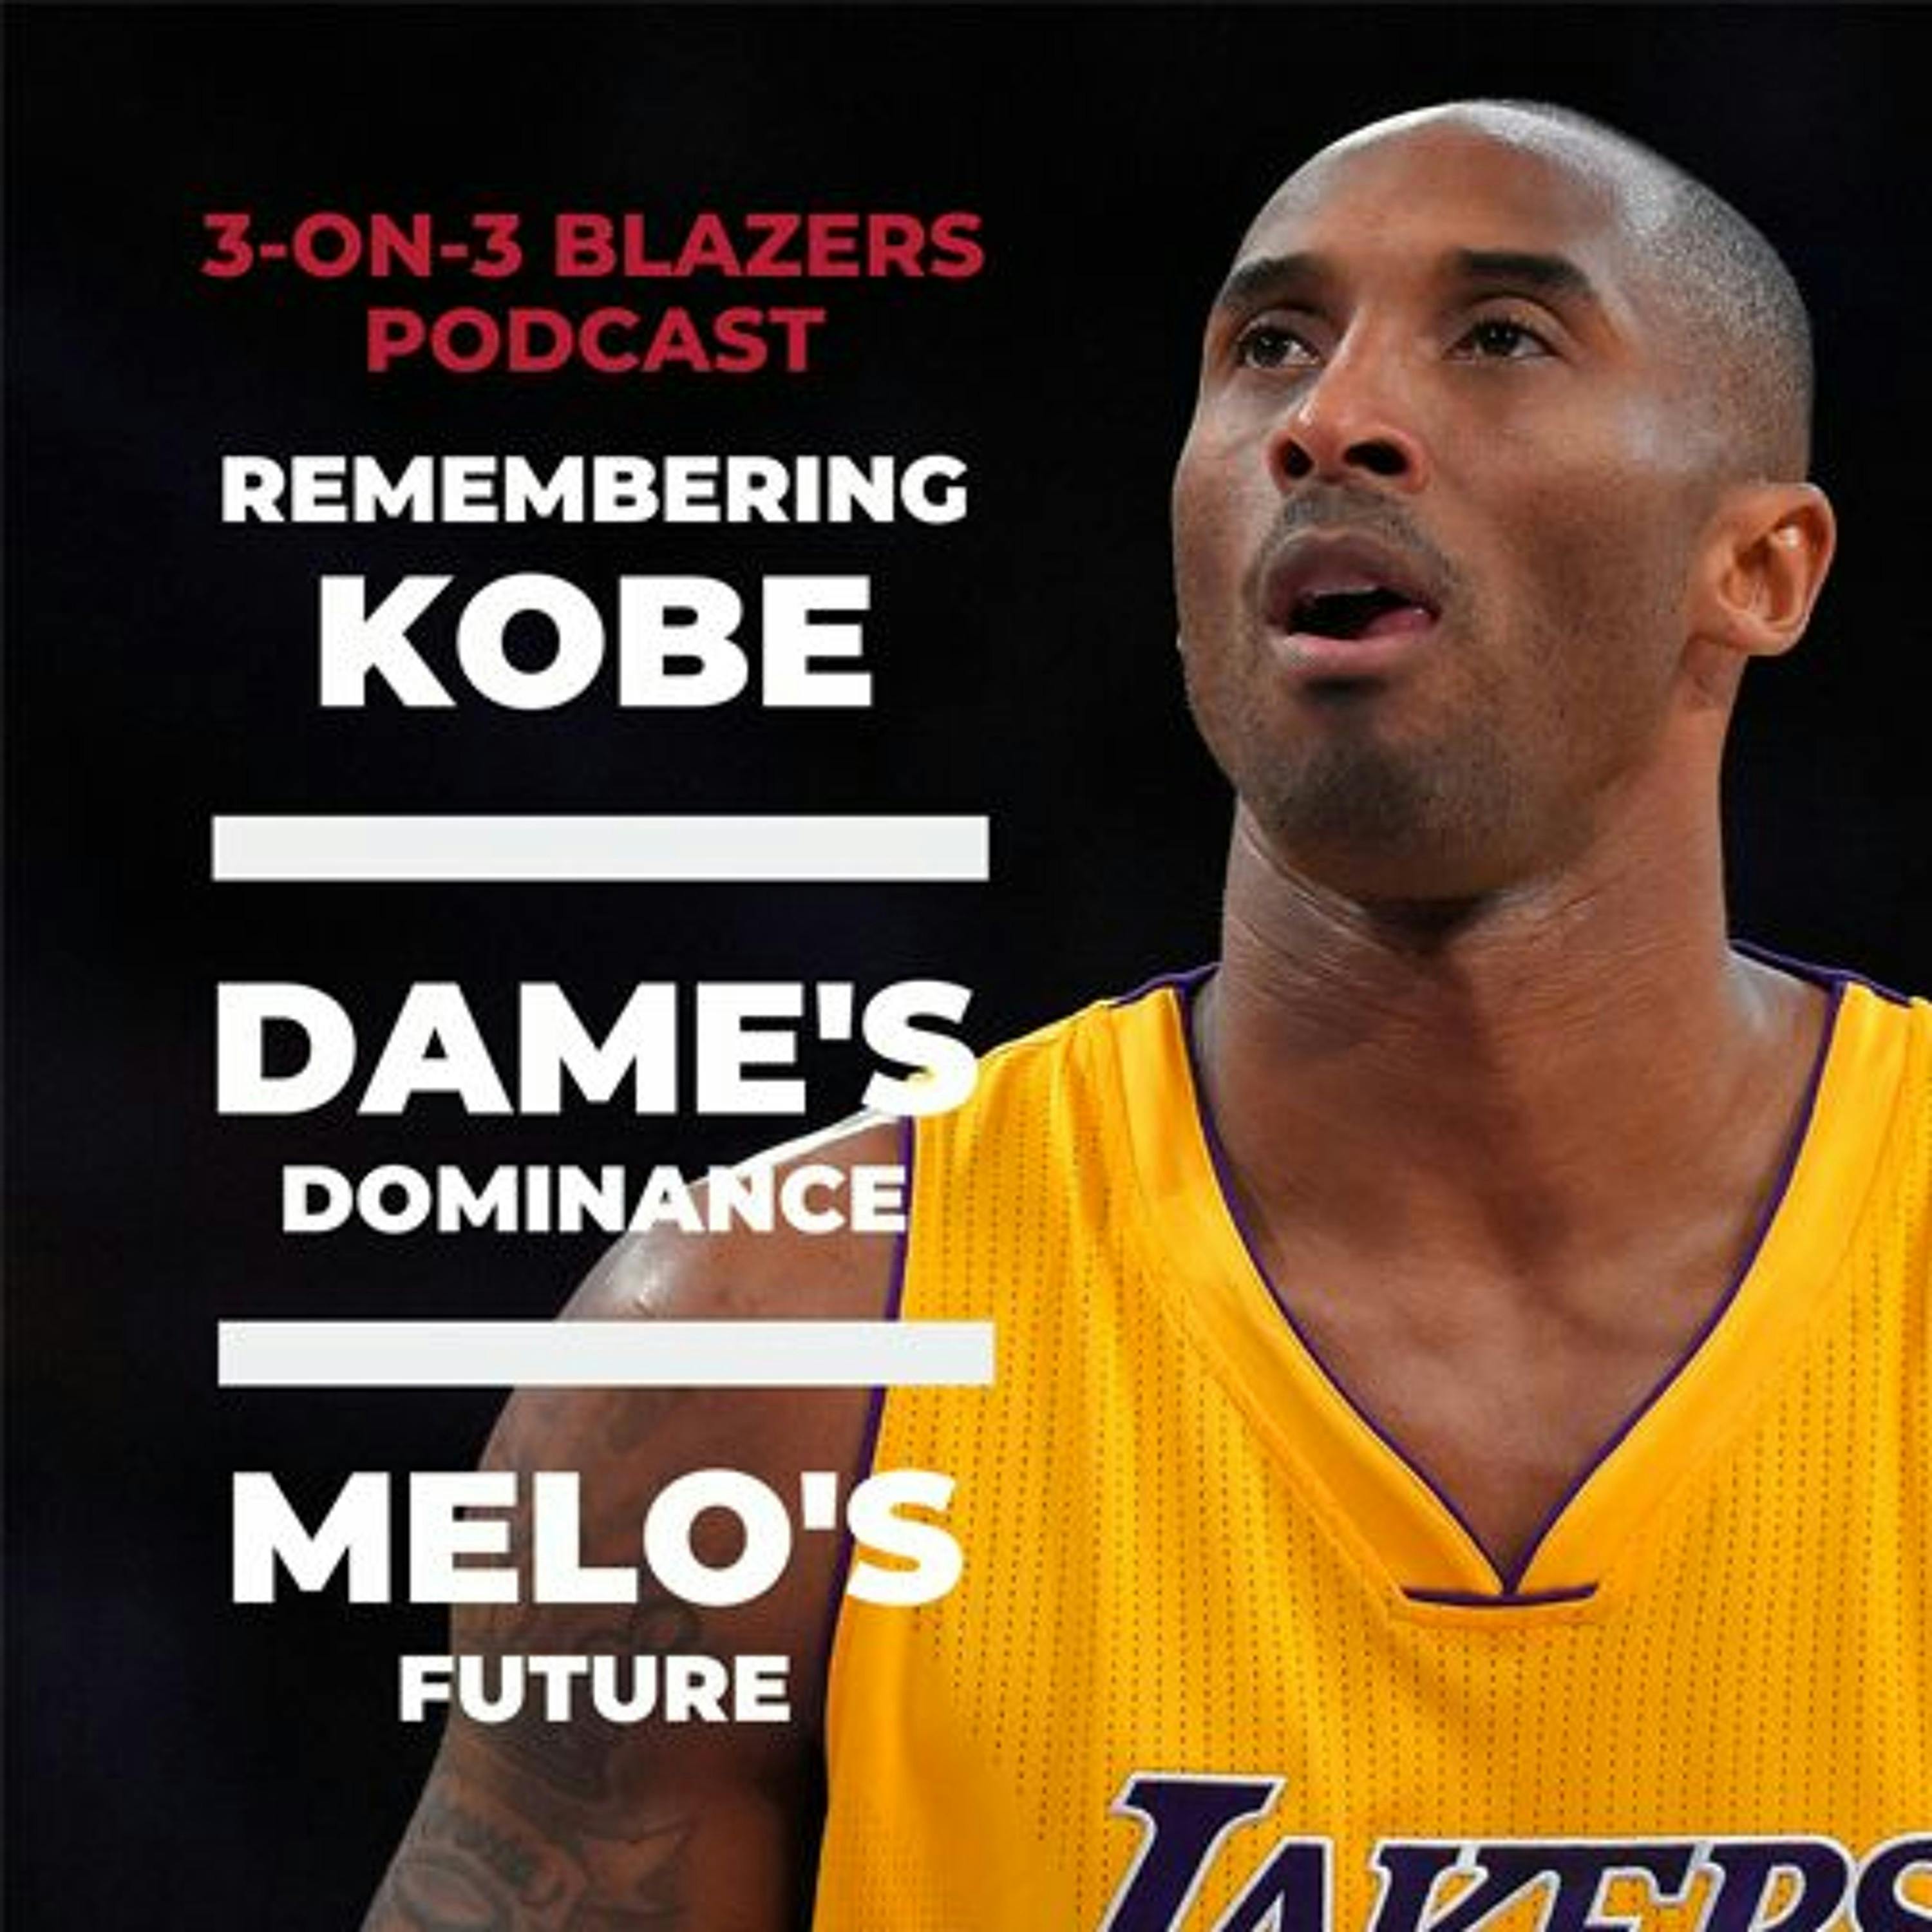 Remembering Kobe, Dame’s dominance and Melo’s future